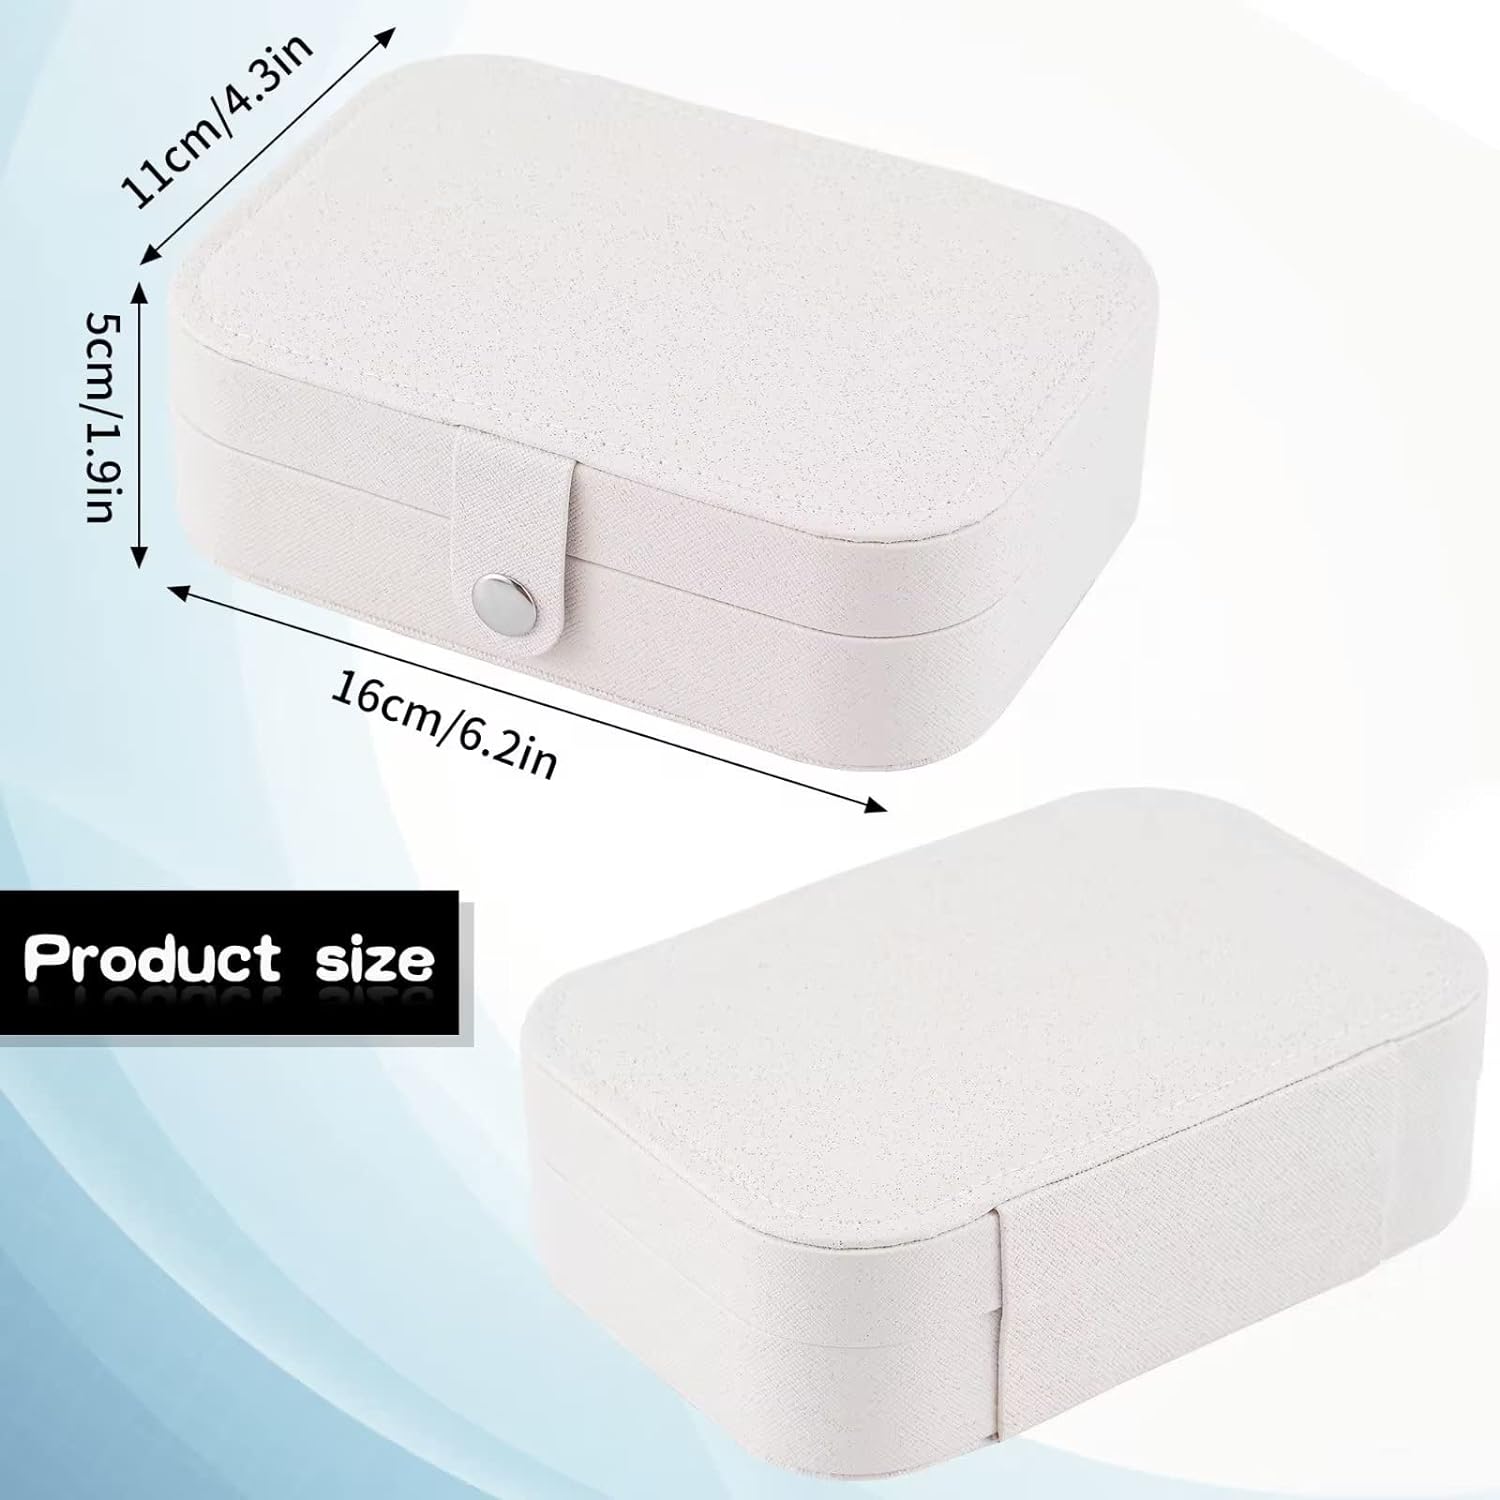 Travel Jewelry Box, PU Leather Small Jewelry Organizer for Women Girls, Double Layer Portable Mini Travel Case Display Storage Holder Boxes for Stud Earrings, Rings,Necklaces,Bracelets (white).